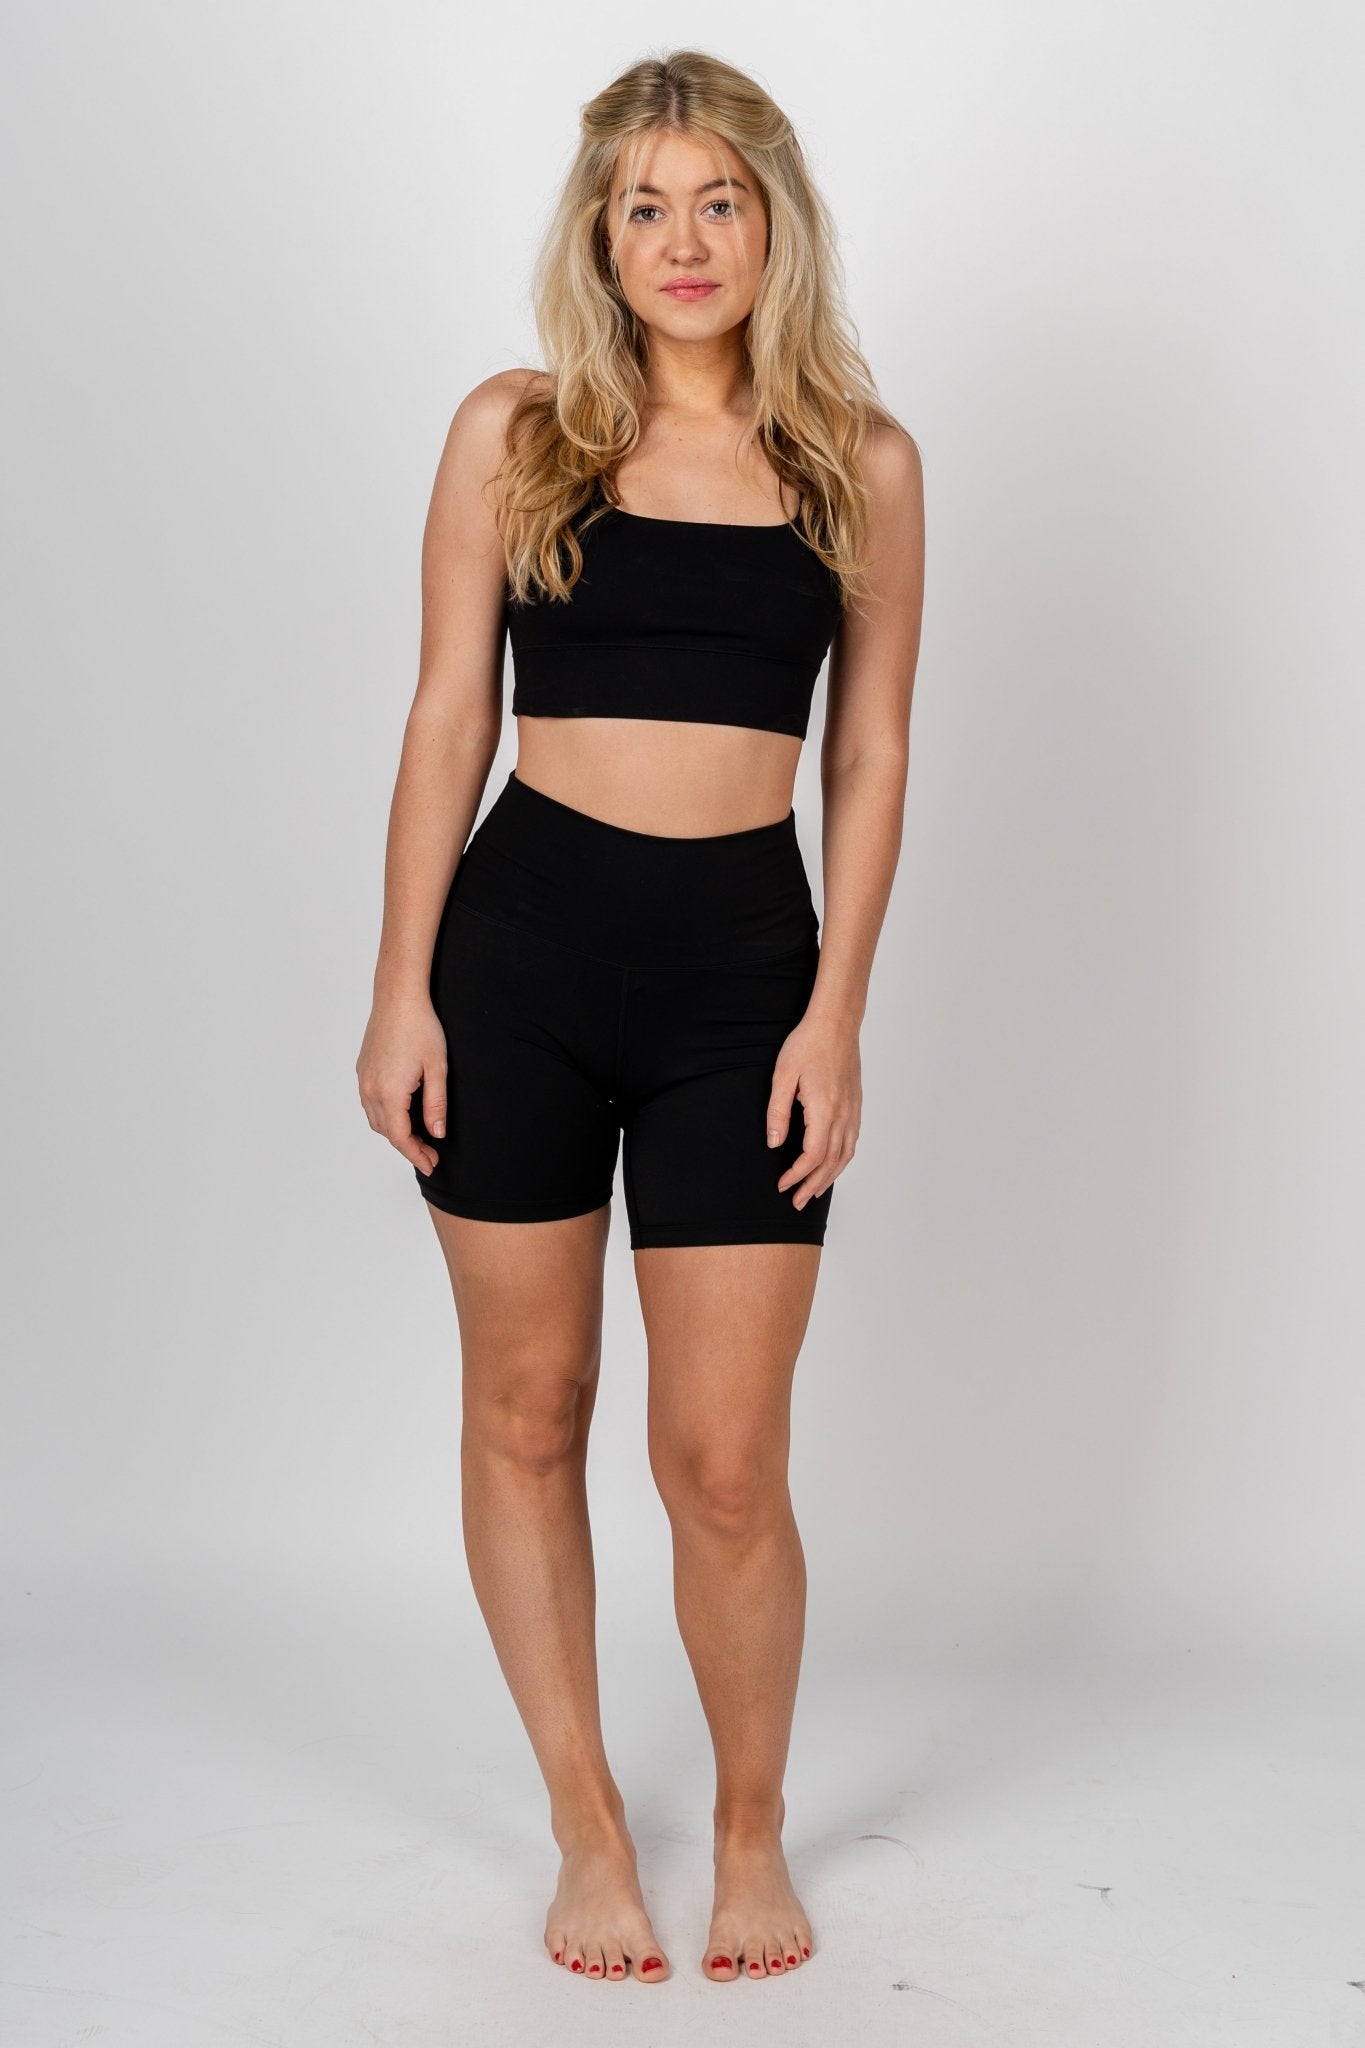 6 inch inseam biker shorts black - Affordable biker shorts - Boutique Shorts at Lush Fashion Lounge Boutique in Oklahoma City